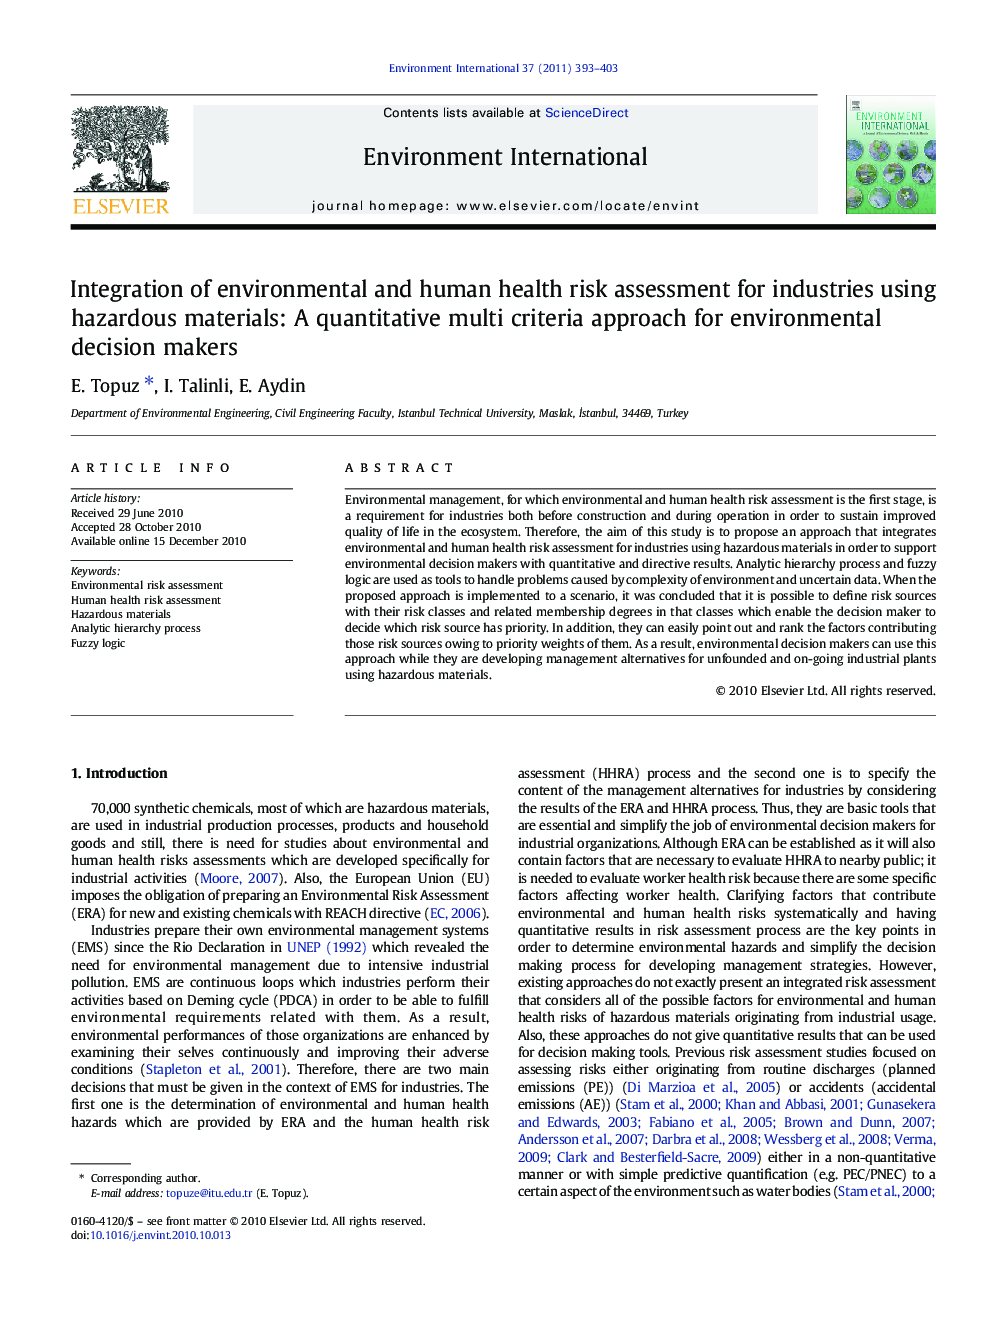 Integration of environmental and human health risk assessment for industries using hazardous materials: A quantitative multi criteria approach for environmental decision makers